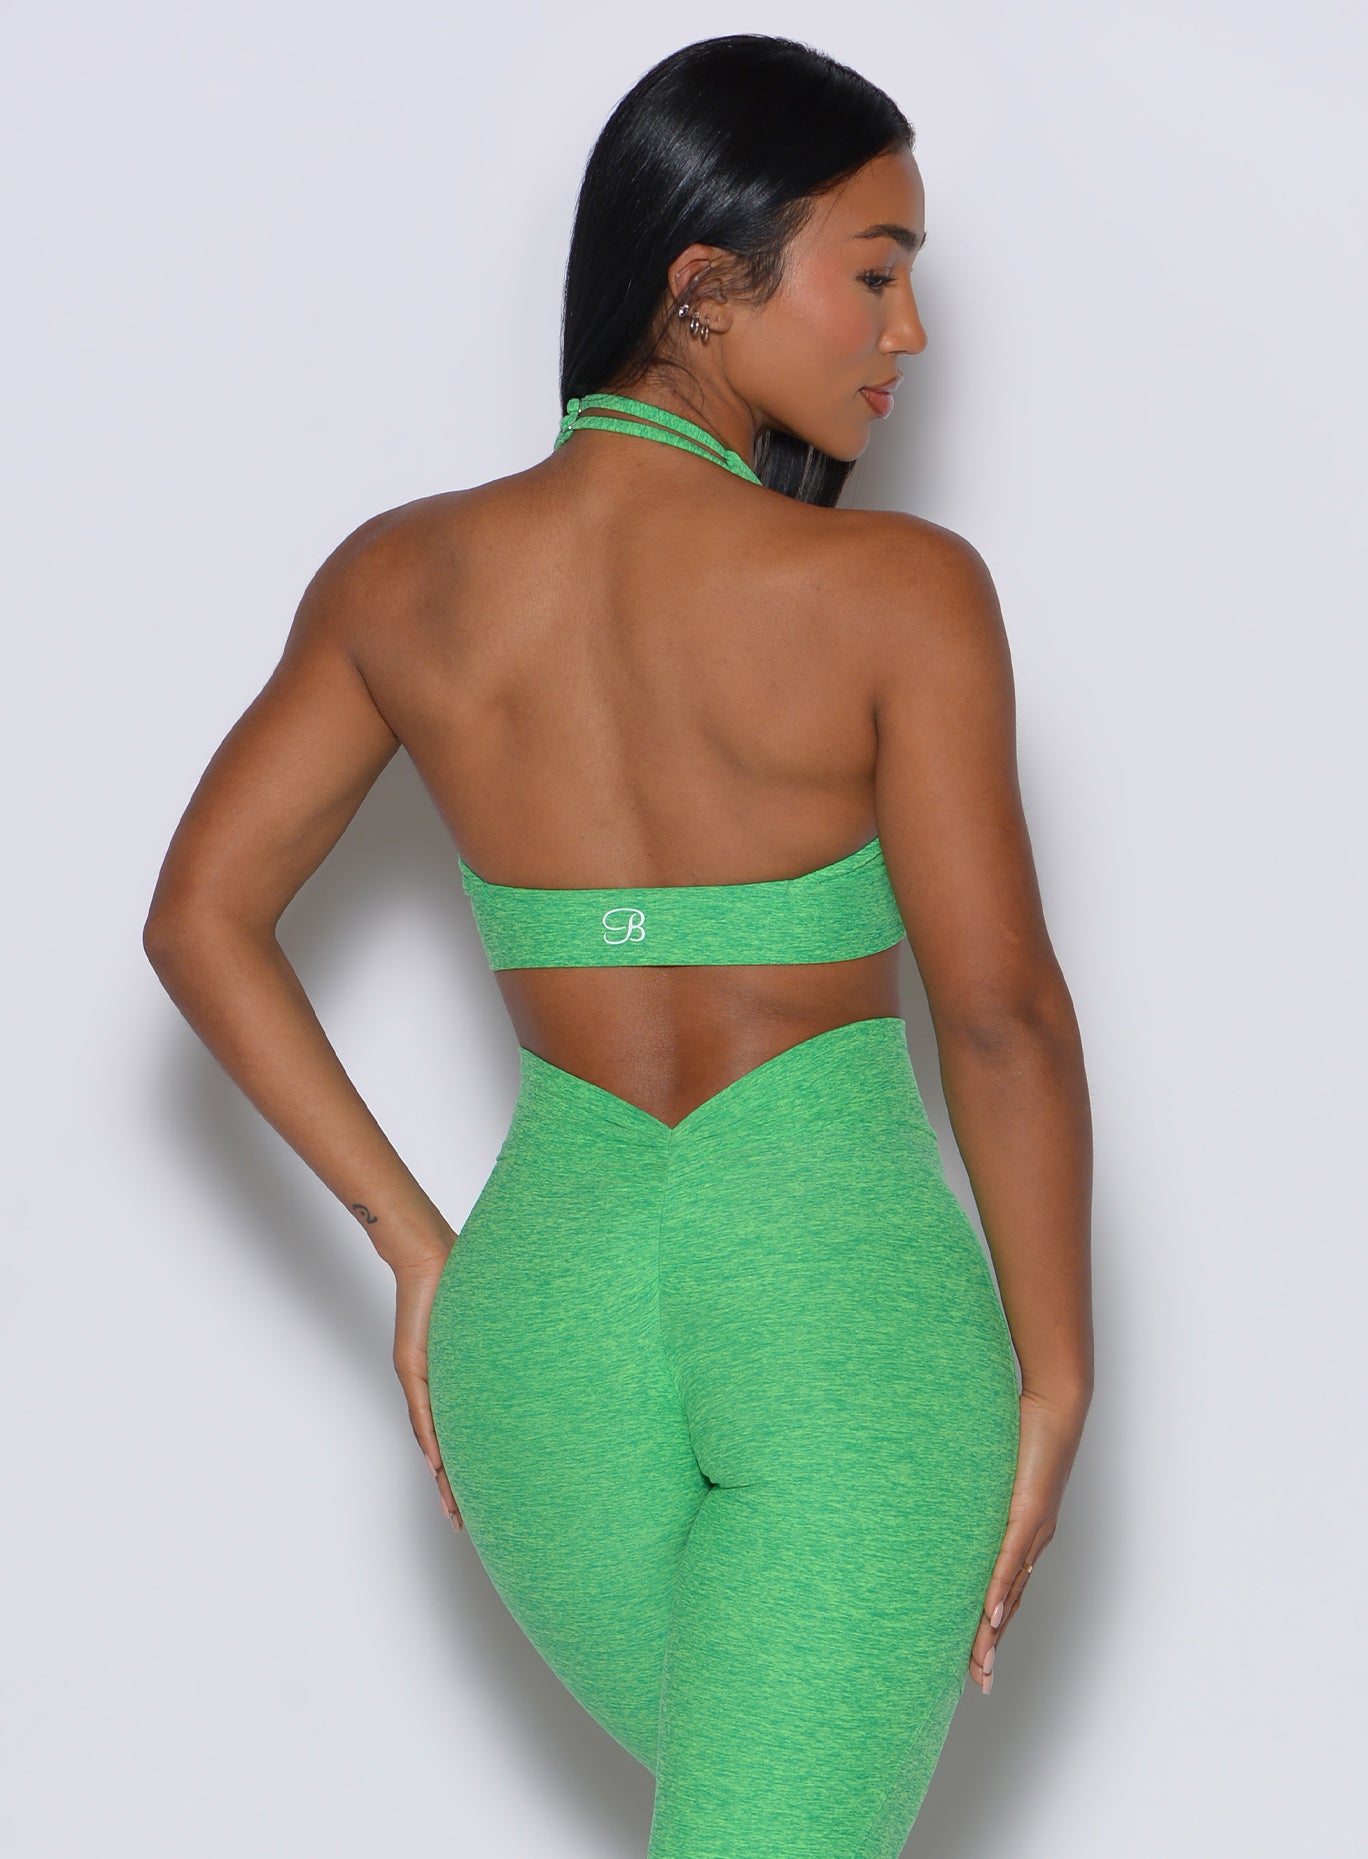 Back profile view of a model facing to her right  wearing our backless bra in Neon Miami Beach color along with the matching leggings